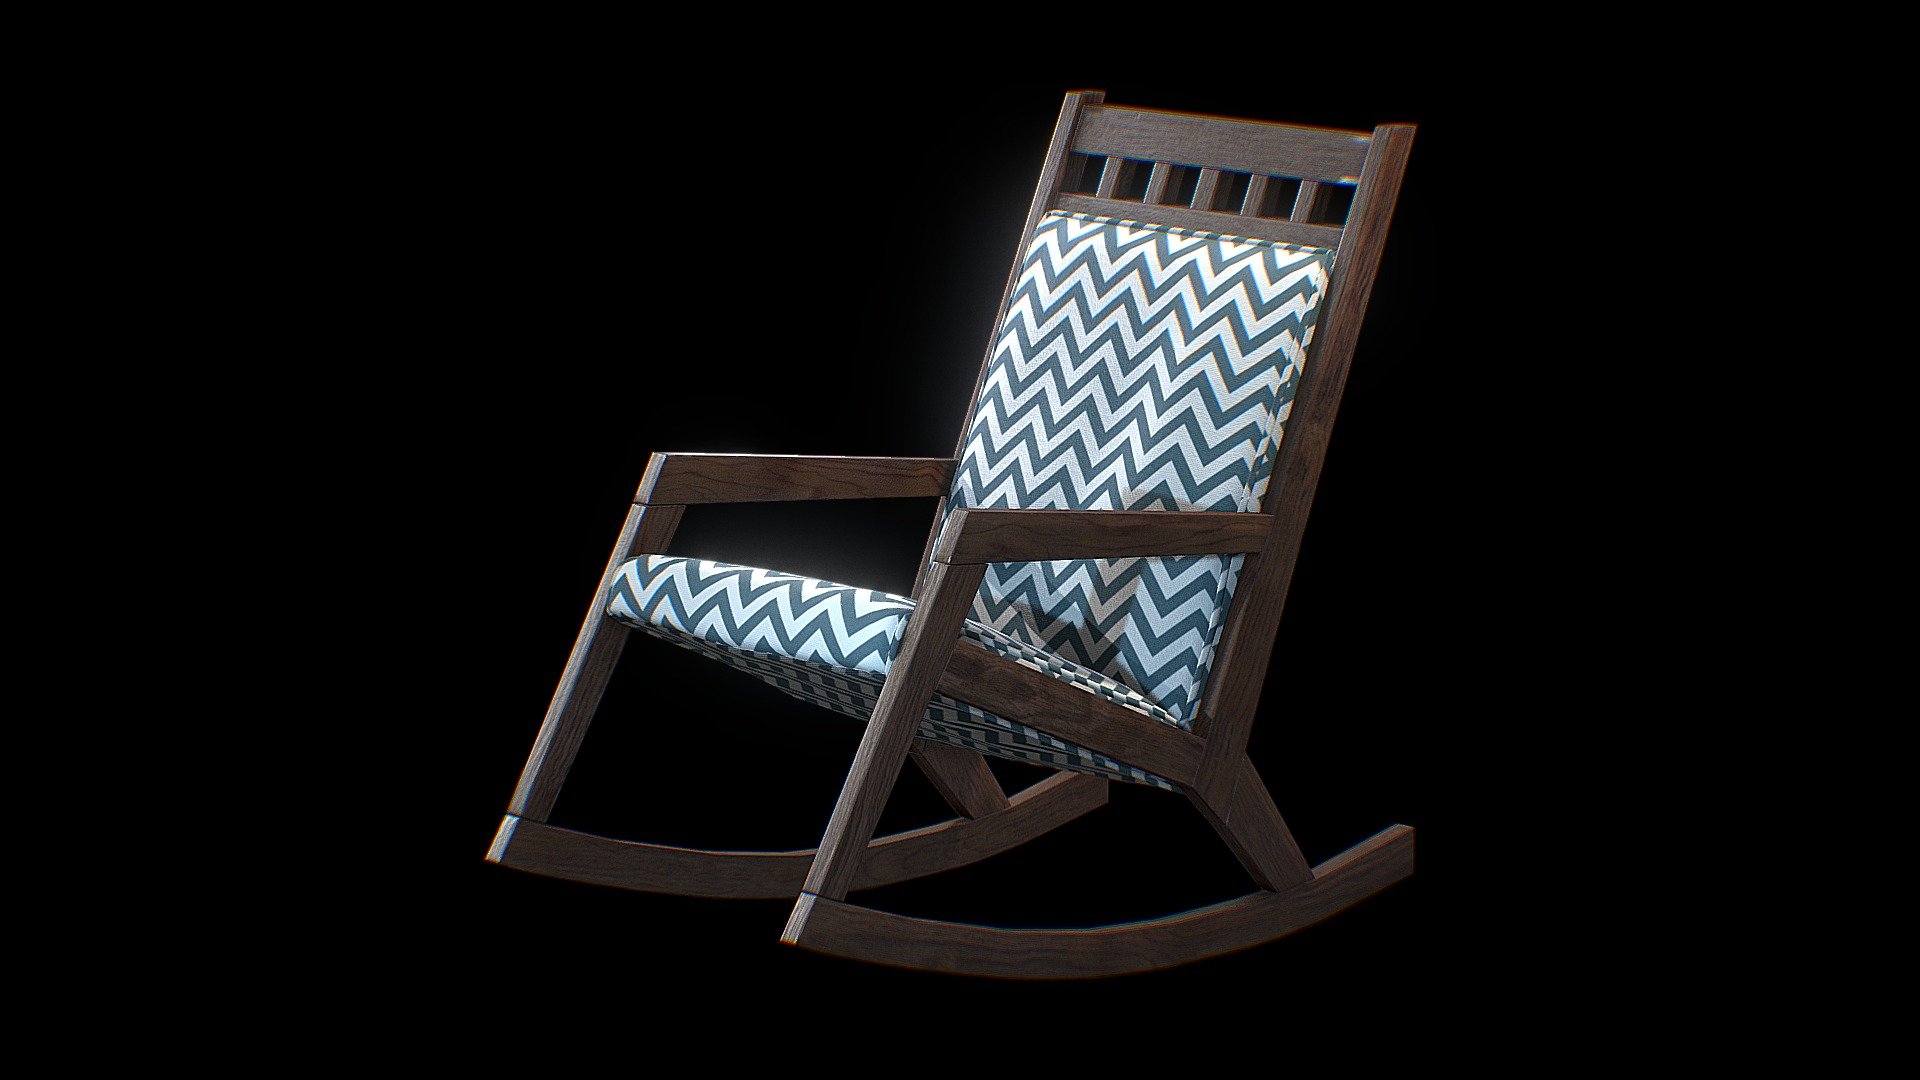 It is a 3d models of rocking chair for using in architecture-interiors. It is can be used as a resting furniture in games and many other interior render scenes.

This model is created in 3ds Max and textured in Substance Painter.

This model is made in real proportions.

High quality of textures are available to download.

Metal-ness workflow- Base Color, Normal, Metal-ness, Ambient Occlusion and Roughness Textures - Rocking Chair by Mitsy - Buy Royalty Free 3D model by 3dJNCTN (@surajrai18.sr) 3d model